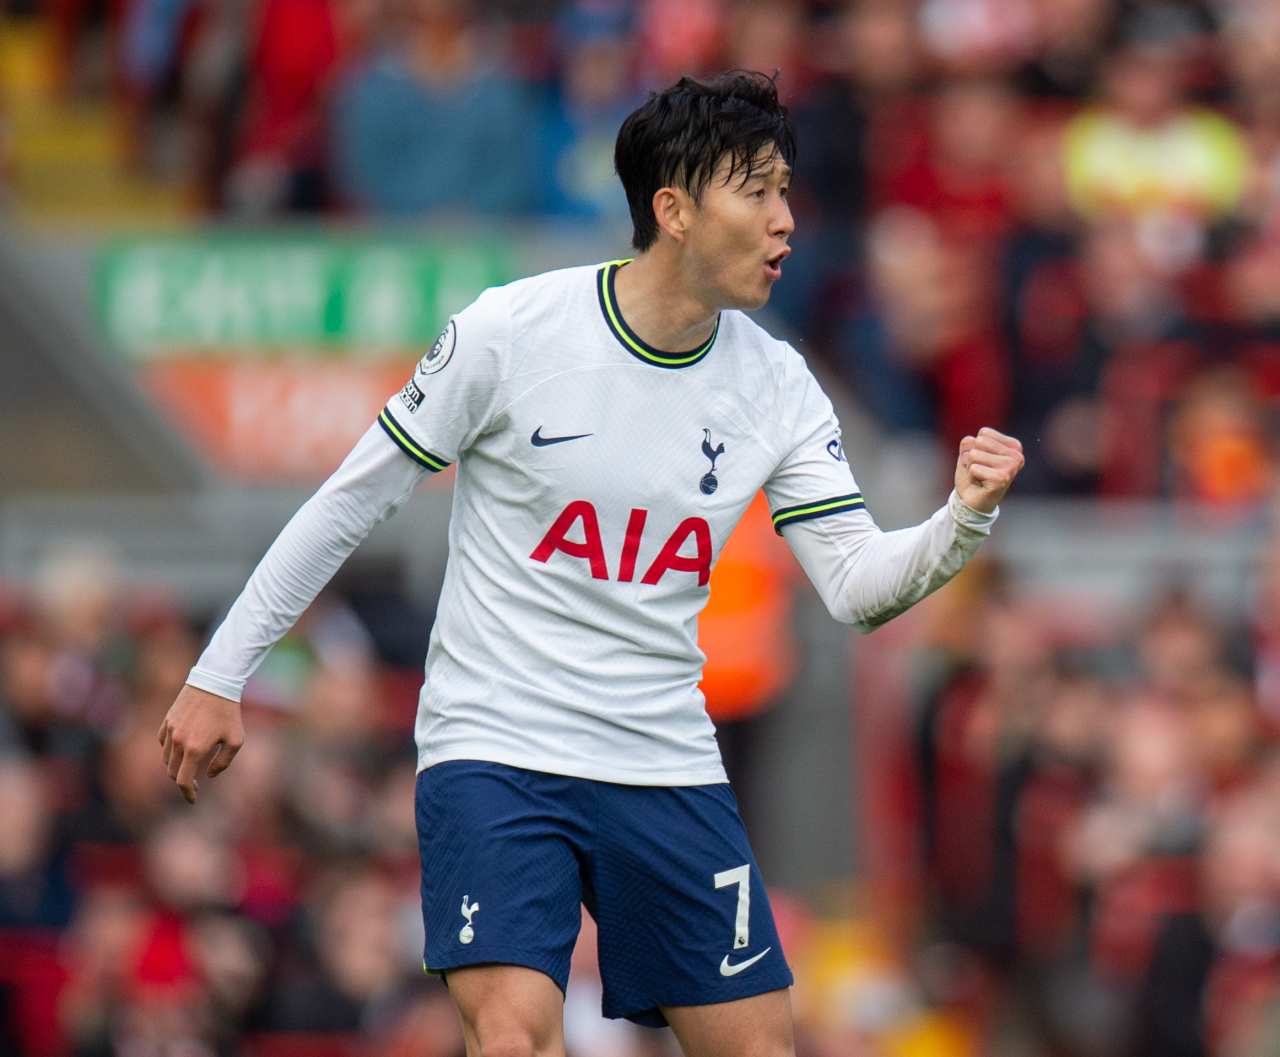 Son Heung-min of Tottenham Hotspur celebrates his goal against Liverpool during the clubs' Premier League match at Anfield in Liverpool, England, on Sunday (EPA)